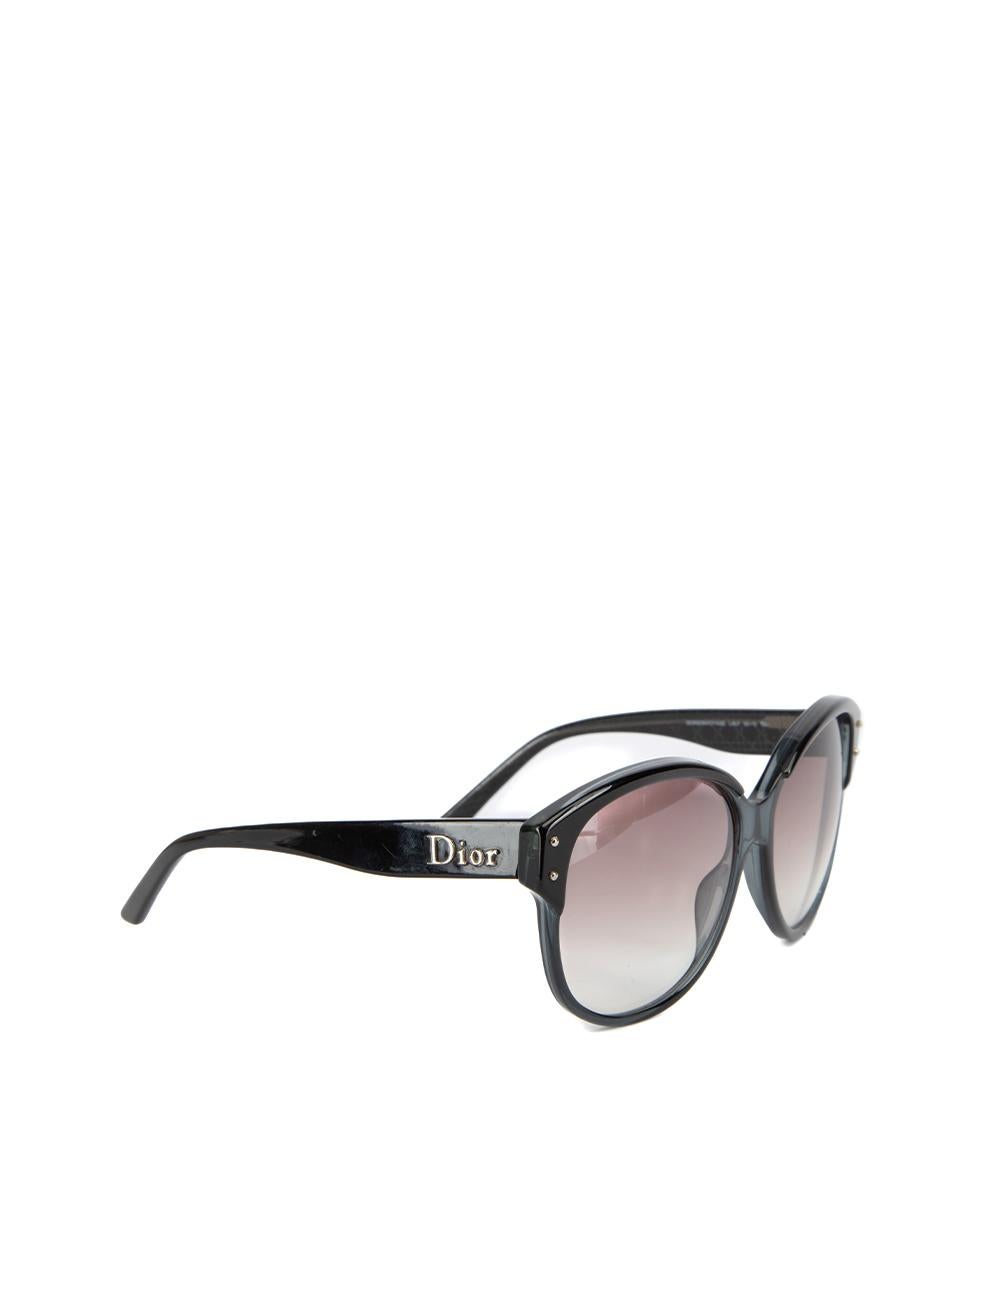 CONDITION is Very good. Minimal wear to sunglasses is evident. Scratches can be seen and residue around the brand name on the left arm on this used Dior designer resale item. This item comes with original case which shows moderate signs of wear.